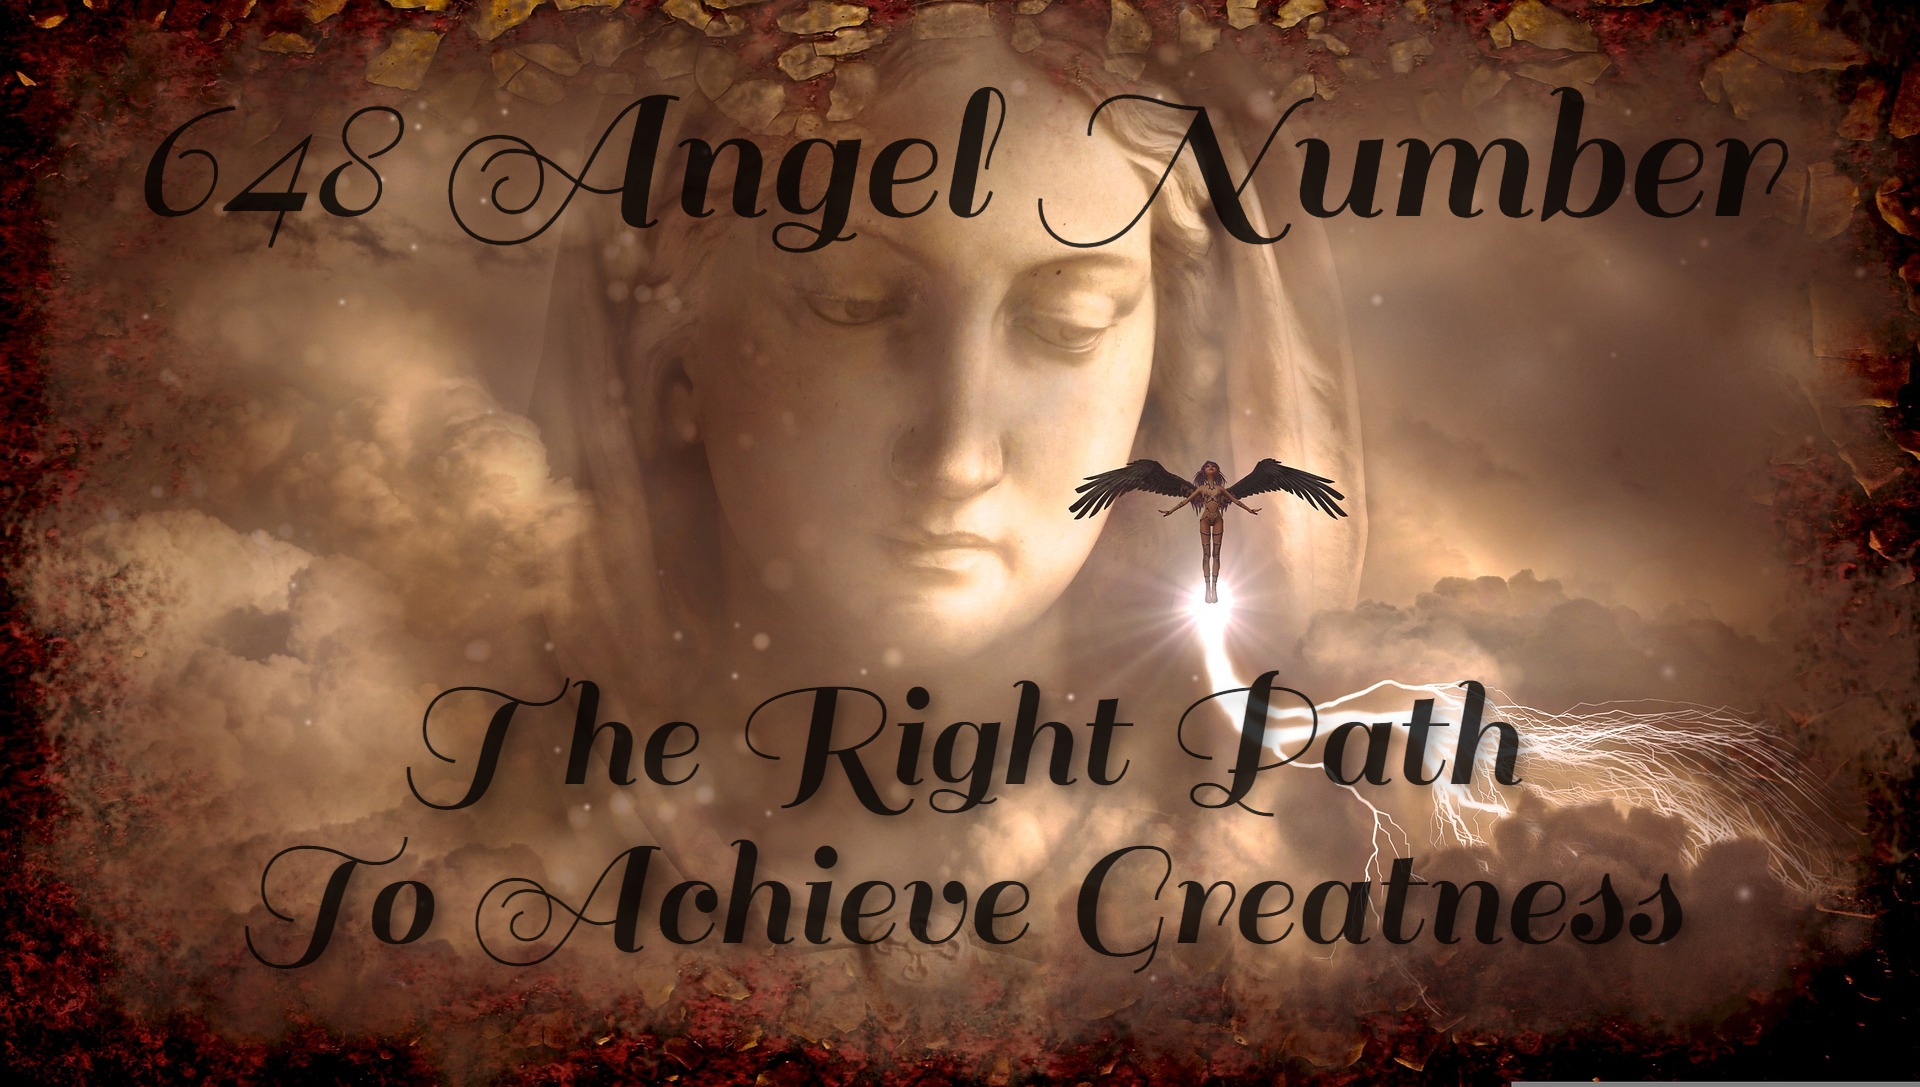 648 Angel Number - The Right Path To Achieve Greatness